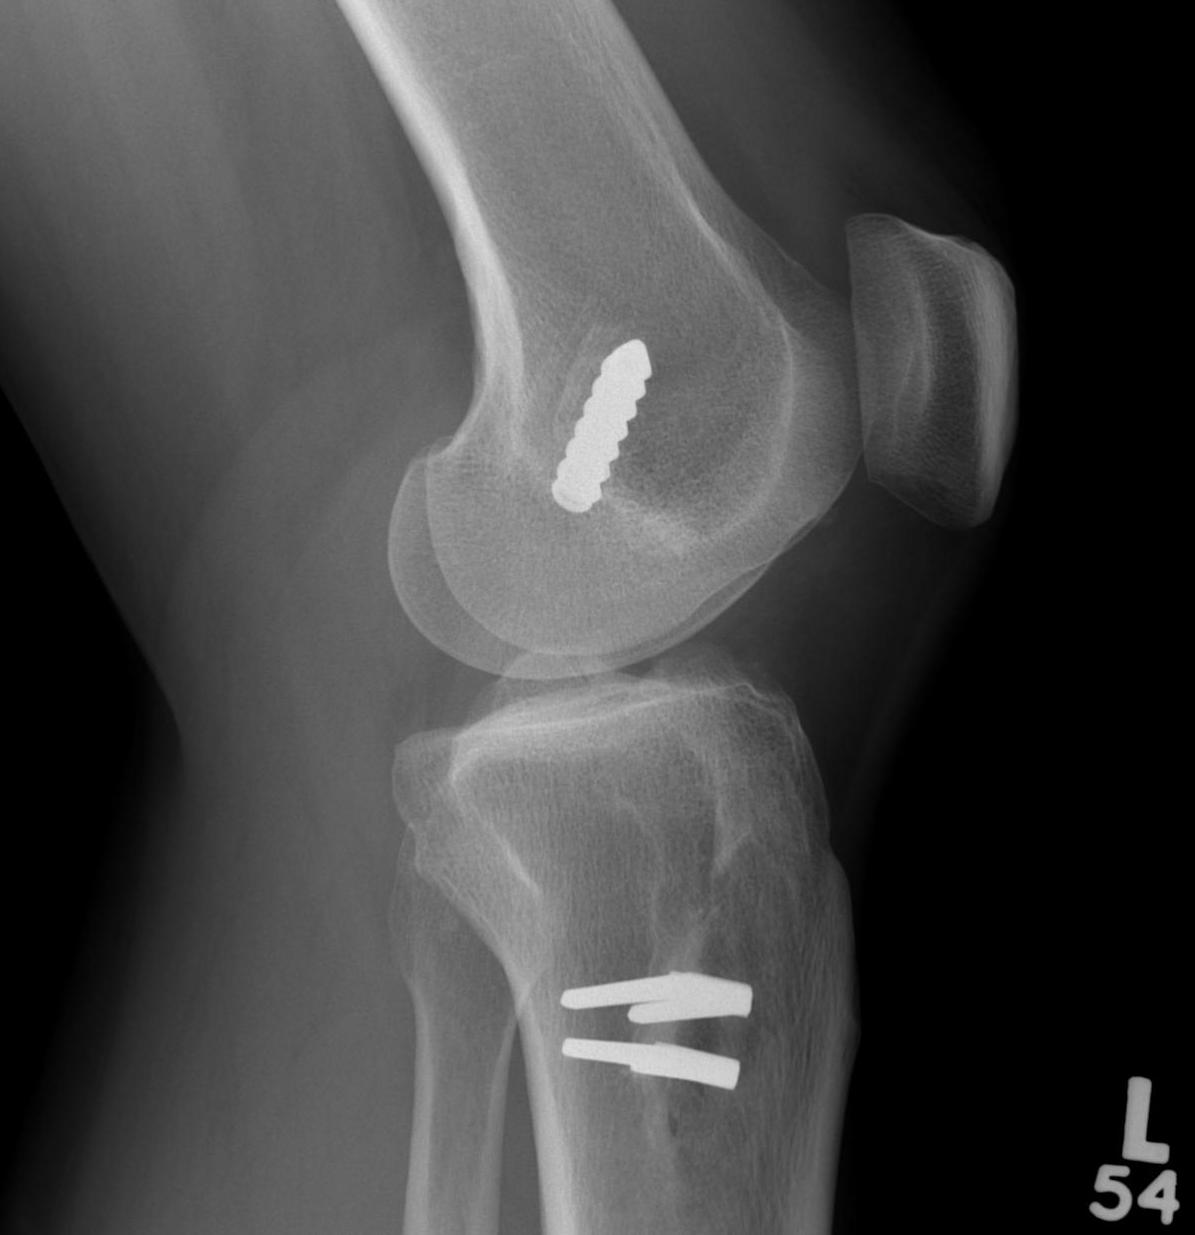 Revision ACL Graft Placed posterior to old femoral tunnel